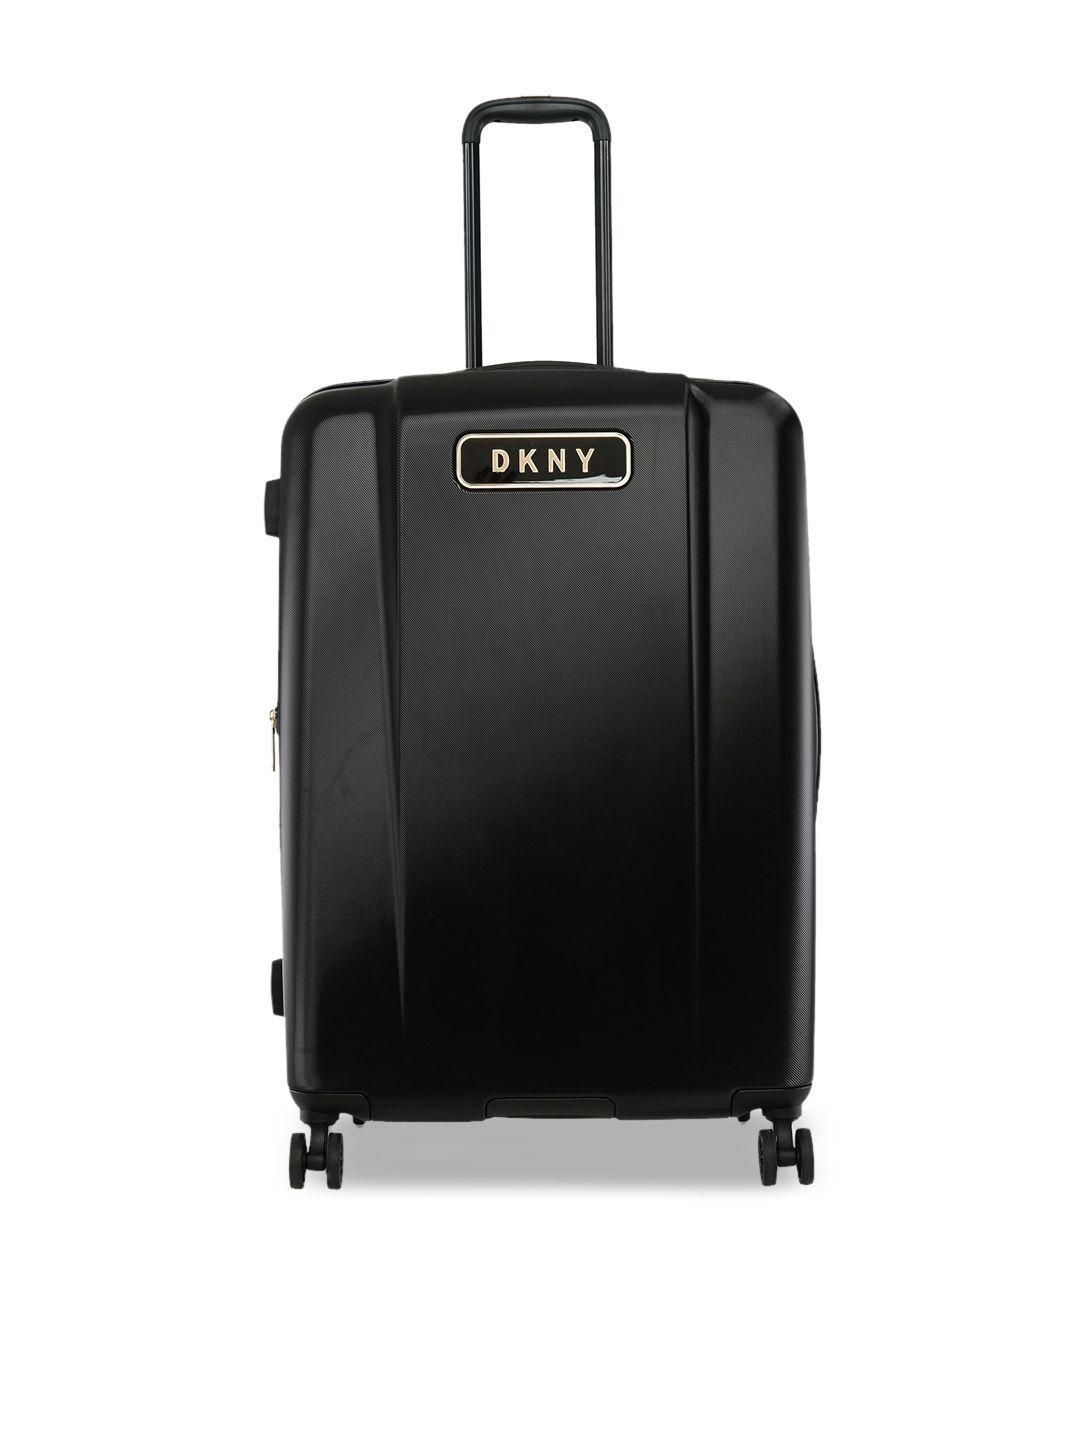 dkny six four one range black & gold color hard case abs / pc large size luggage